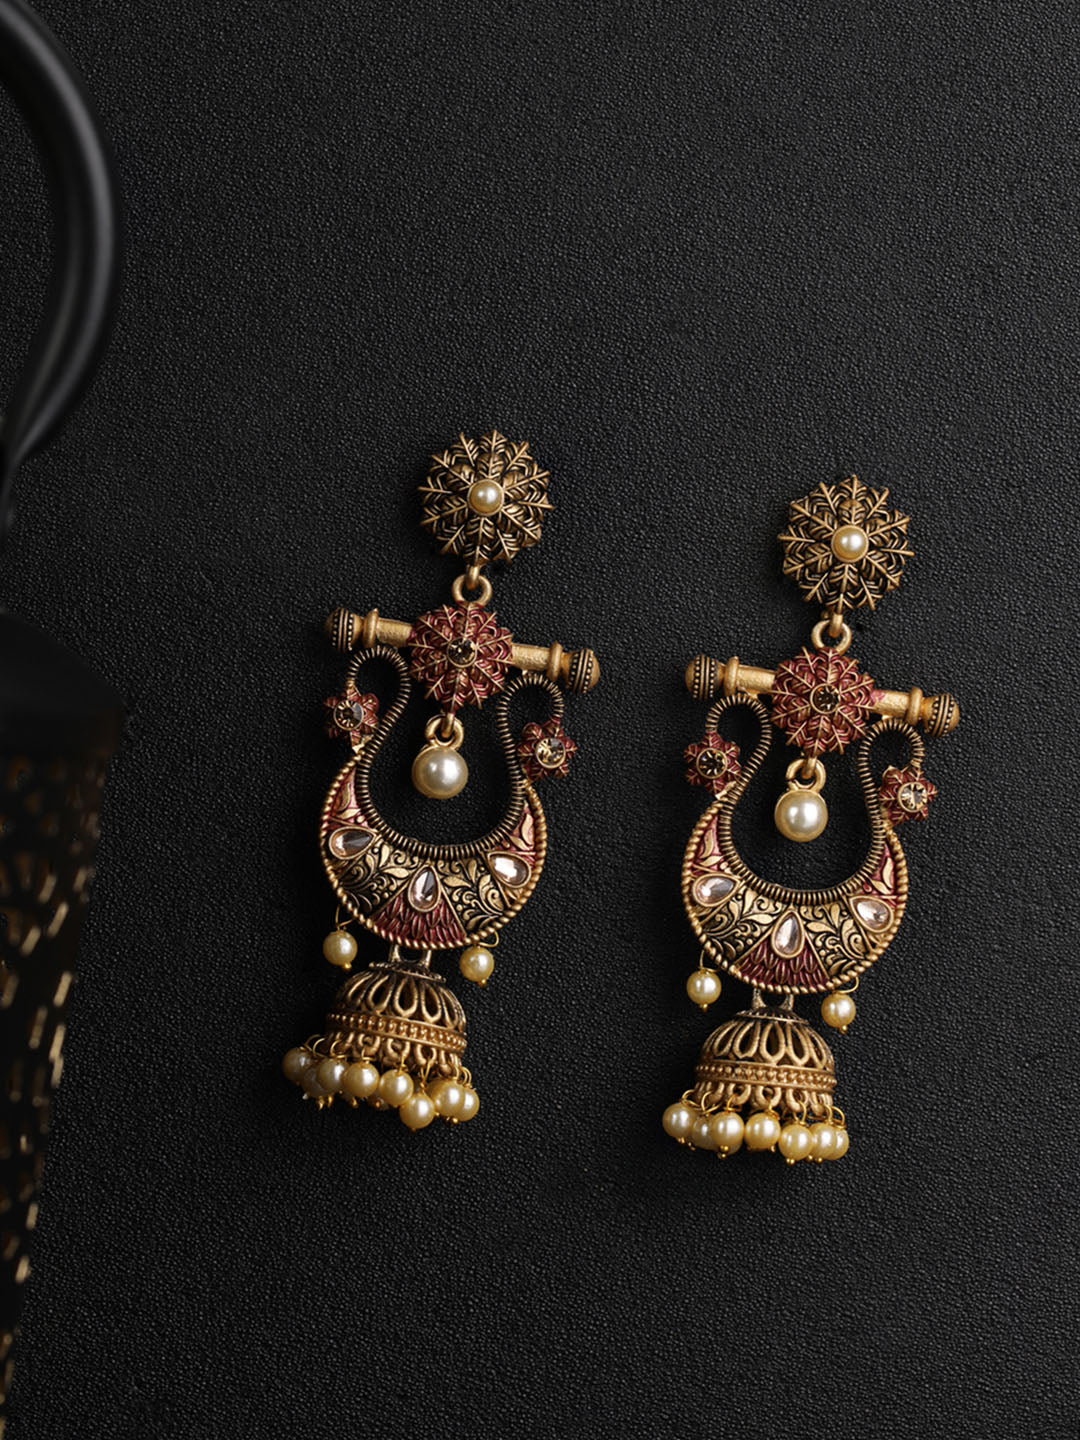 Artificial latest Earrings Designs | Gold earrings designs, Long gold  earrings, Gold earrings indian